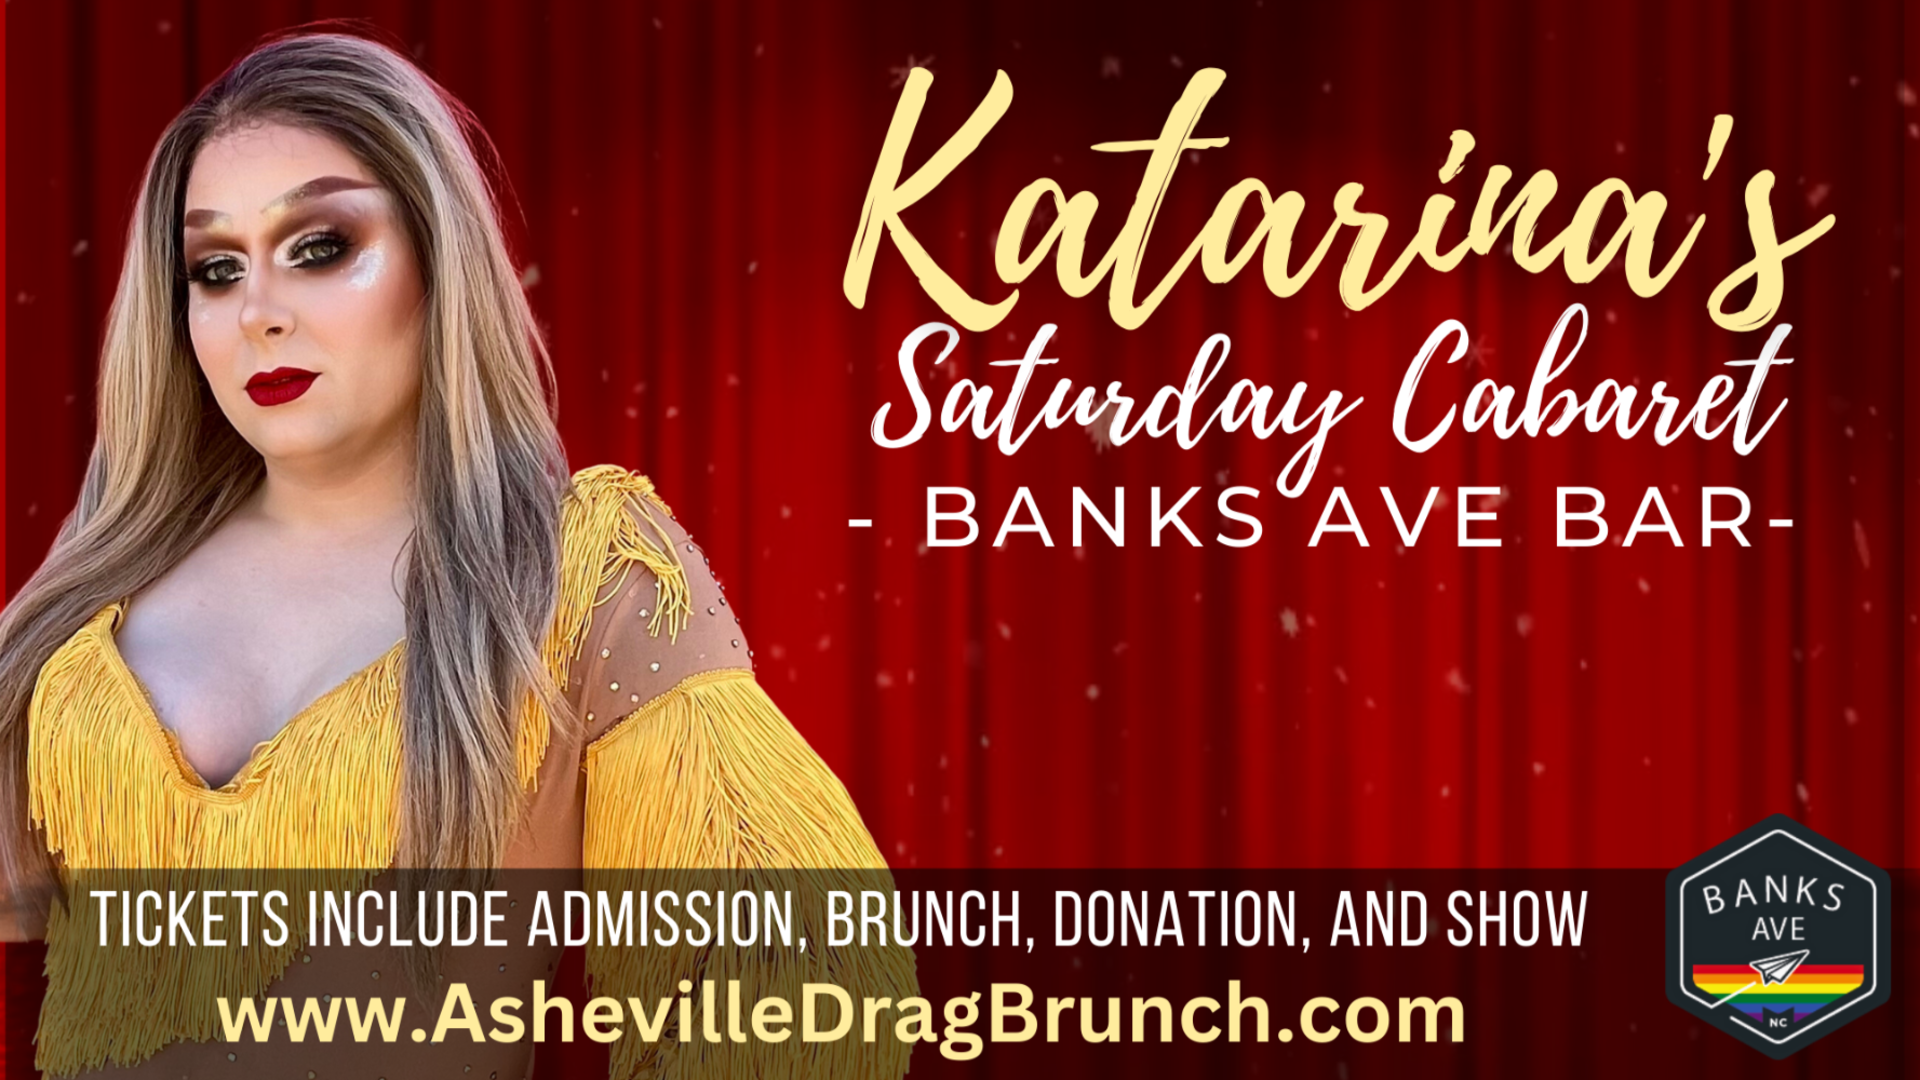 BUY TICKETS – Asheville Drag Brunch: Disney Themed Fundraiser for Homeward  Bound 501(c)3 (All ages) – Banks Ave. Bar, Multiple dates and times